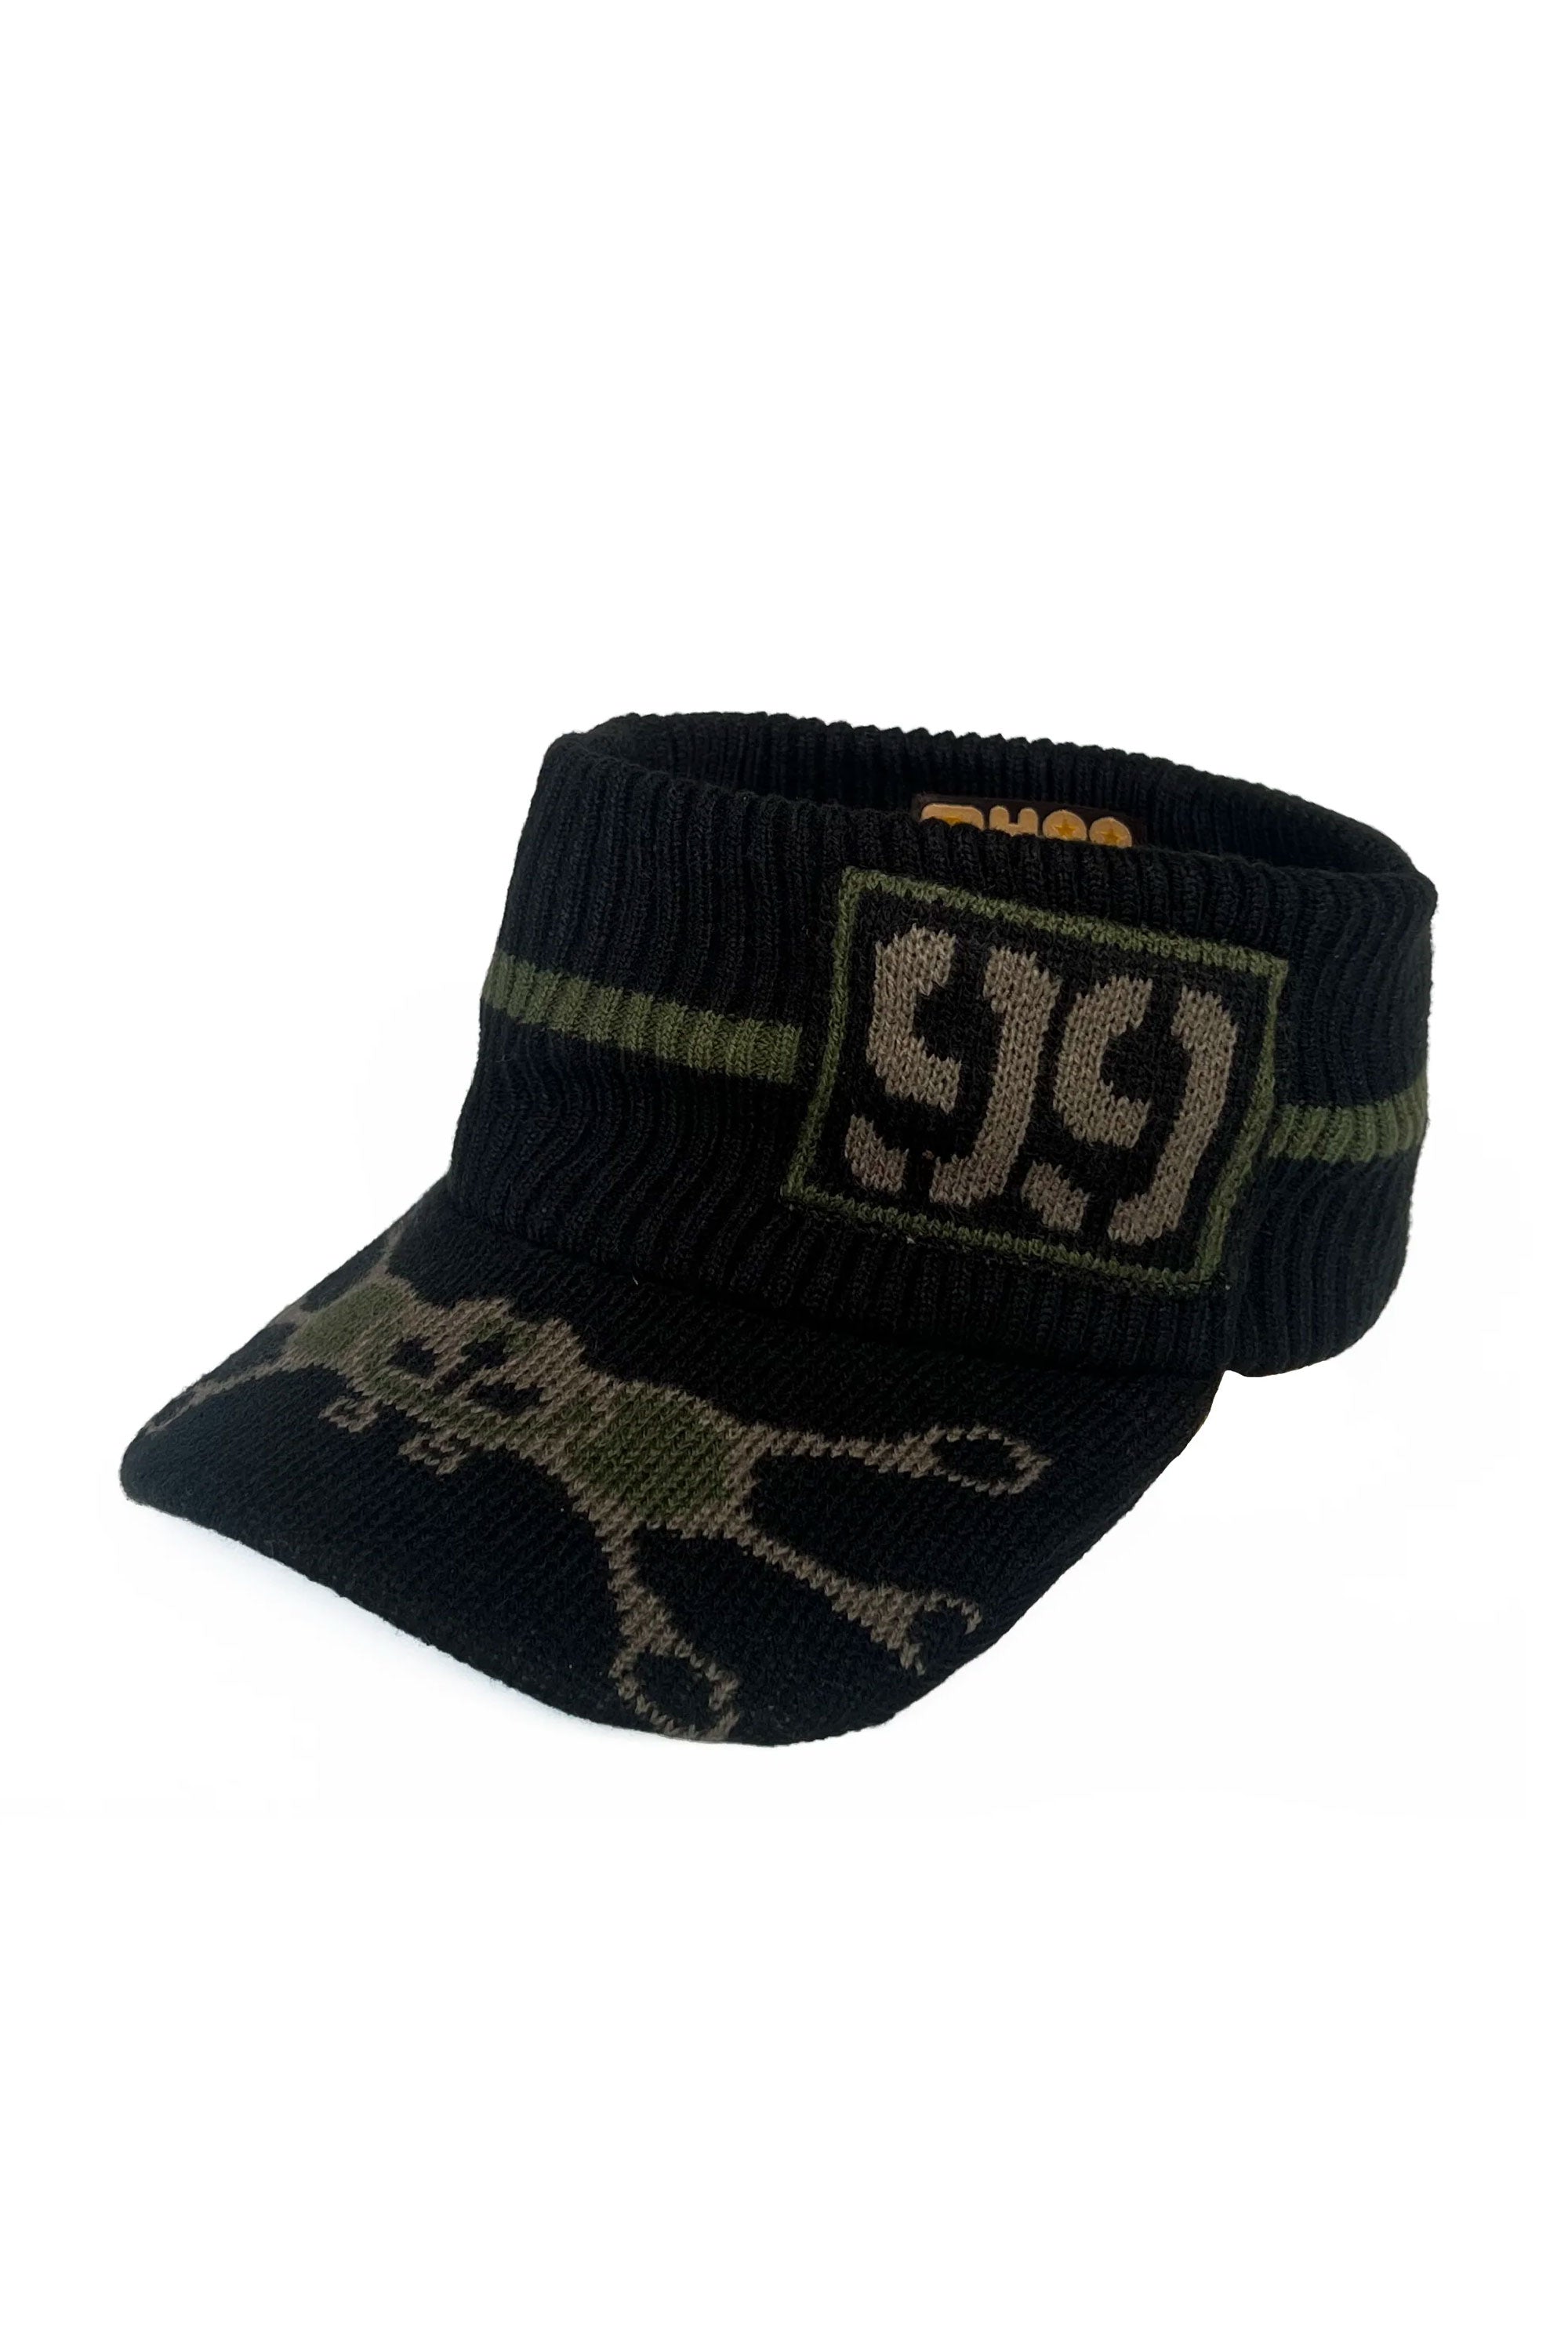 The HAPPY 99 - KNIT VISOR BLACK GREEN available online with global shipping, and in PAM Stores Melbourne and Sydney.